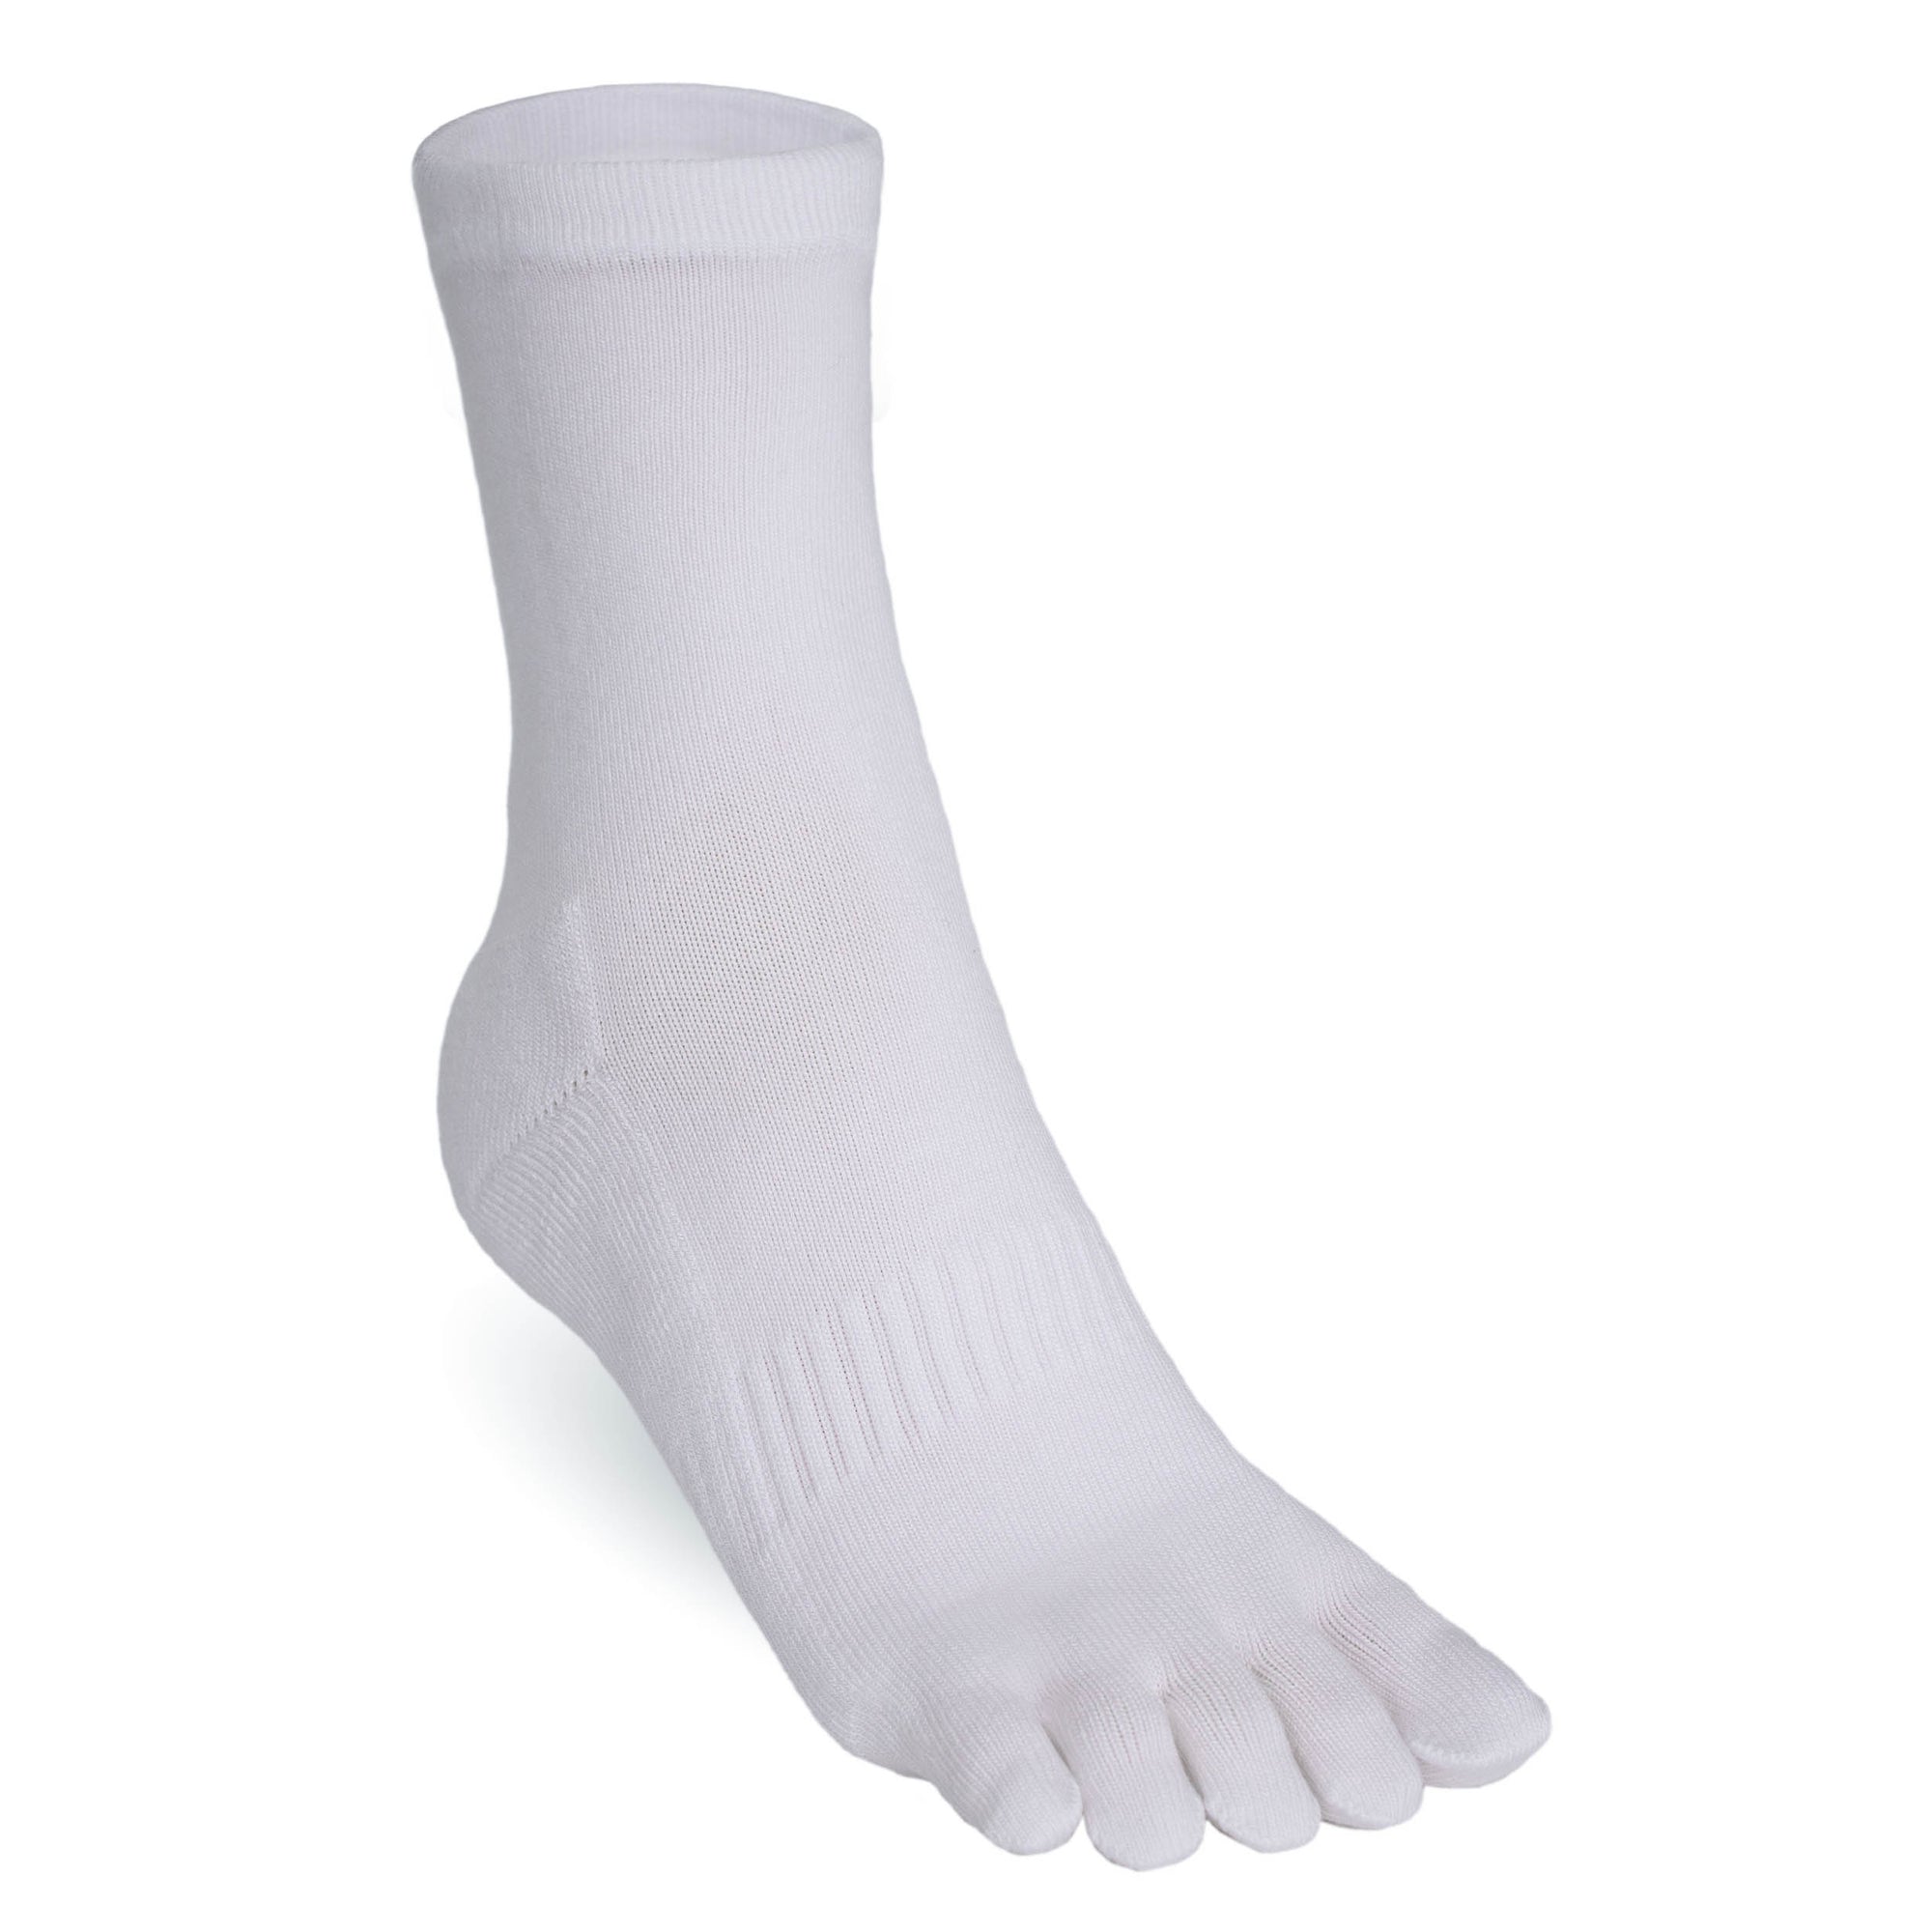 Buy FREECULTR Low-Cut Socks, Breathable Bamboo Fibre, Odour Resistant, Antibacterial, Thermo-Regulated, 360 Arch Support, Moisture Wicking